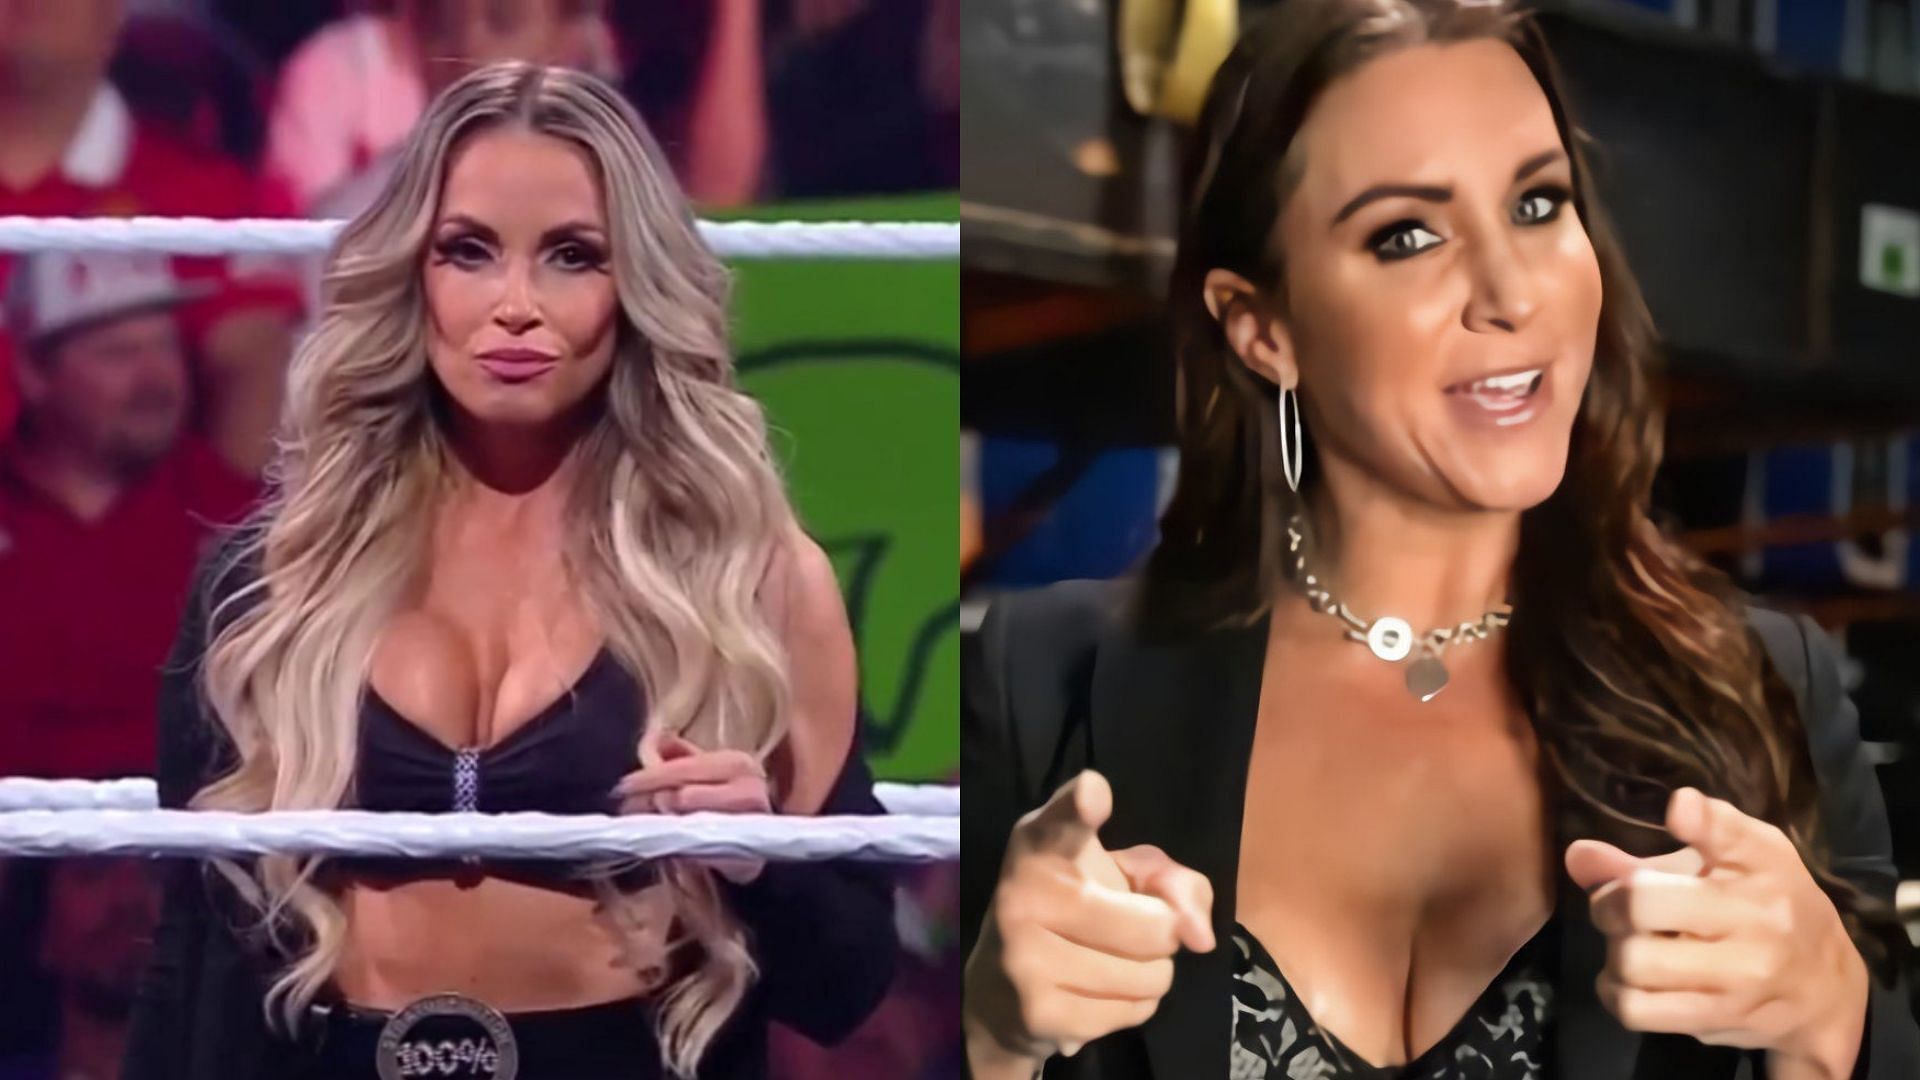 Trish Stratus sent a message to Stephanie McMahon on Twitter